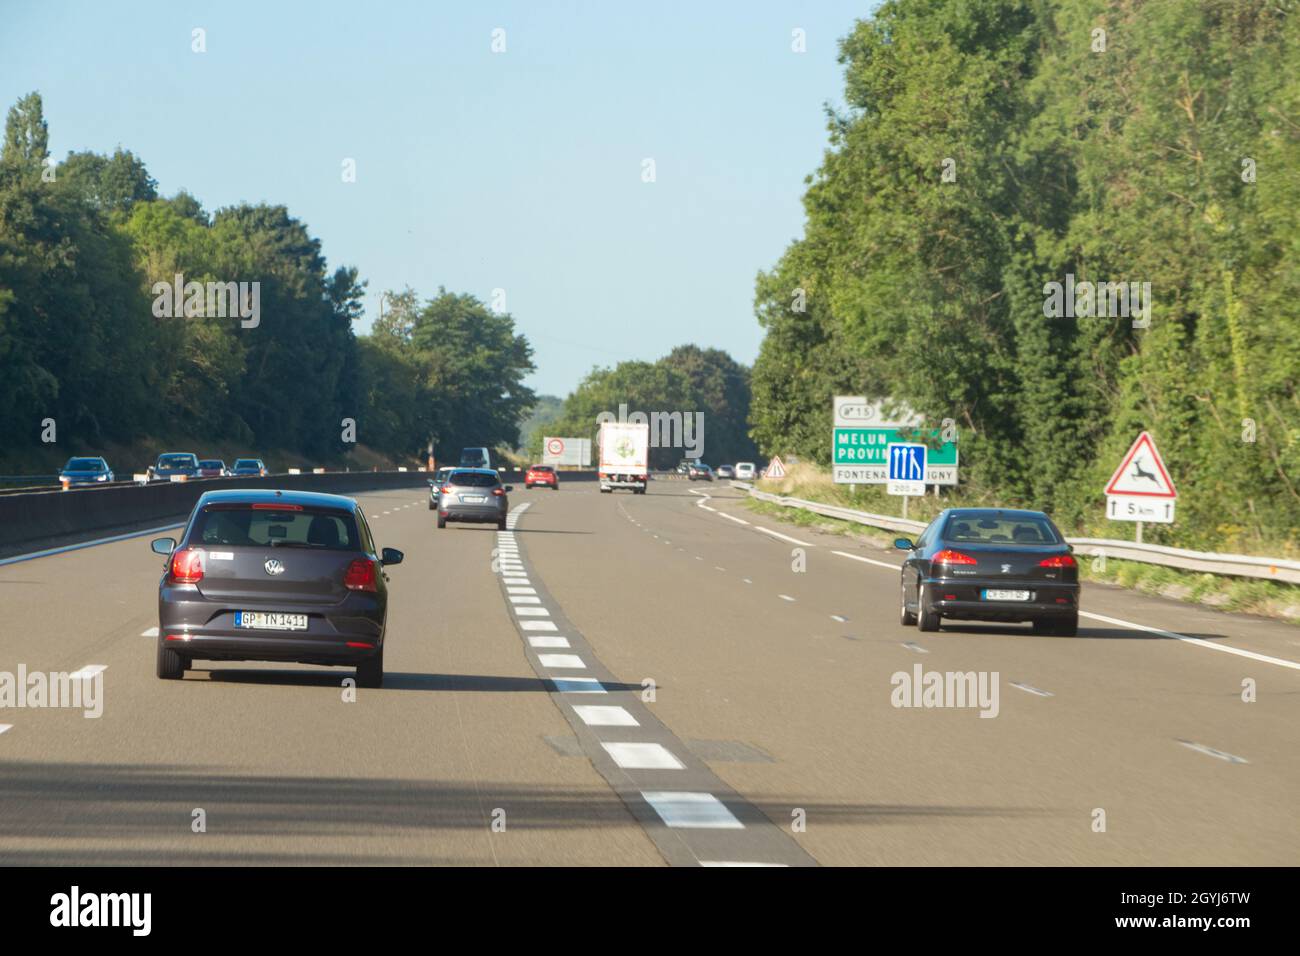 Melun – France, August 19, 2019 : Cars on the highway Stock Photo